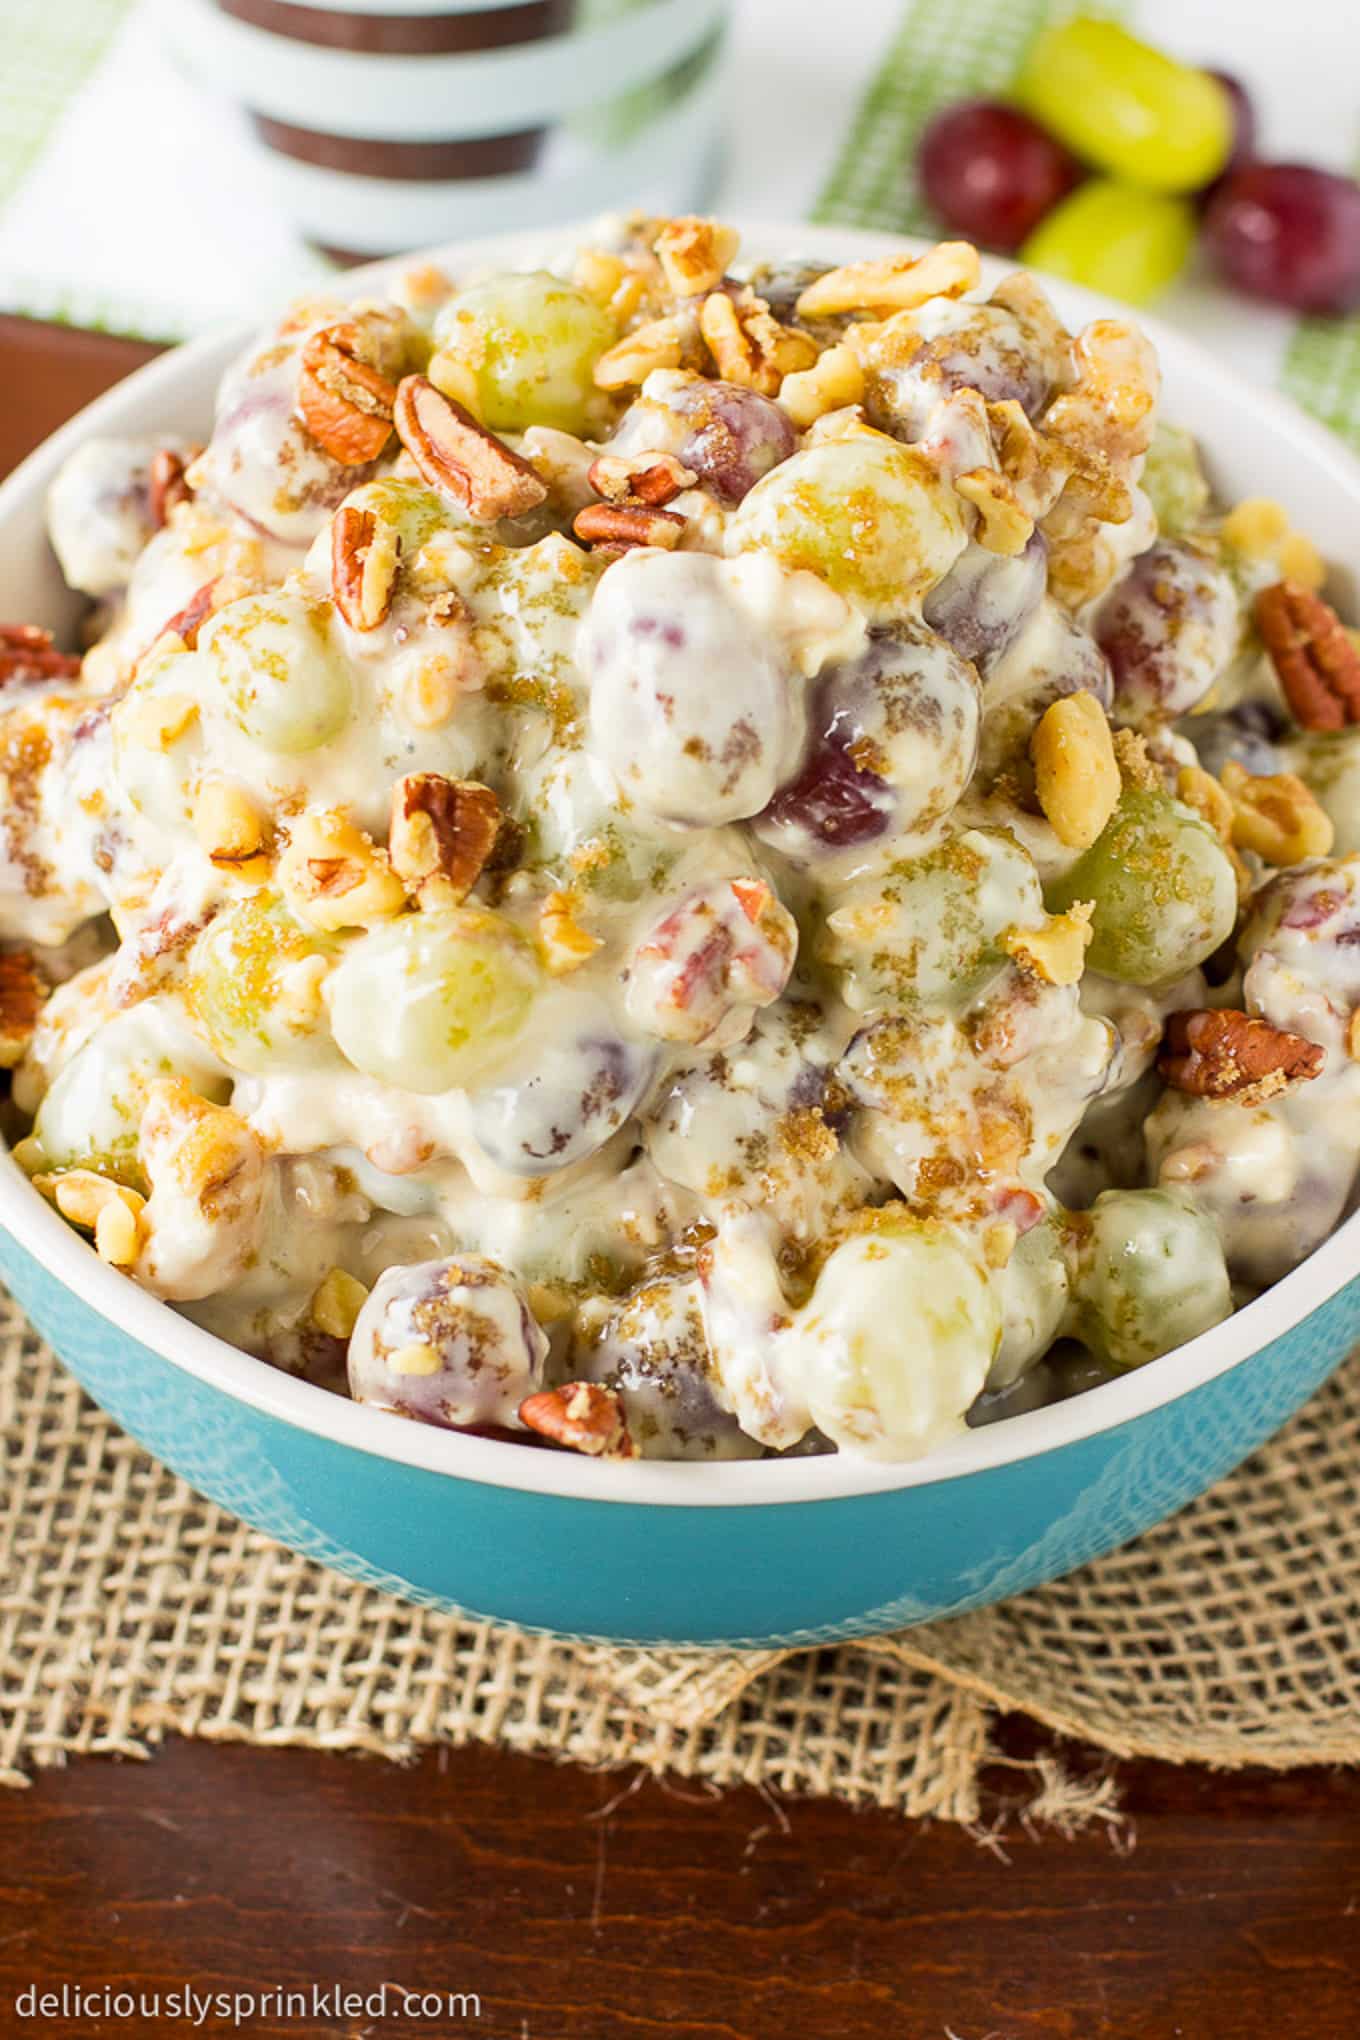 A bowl of grape salad on the table with brown sugar and pecan topping.